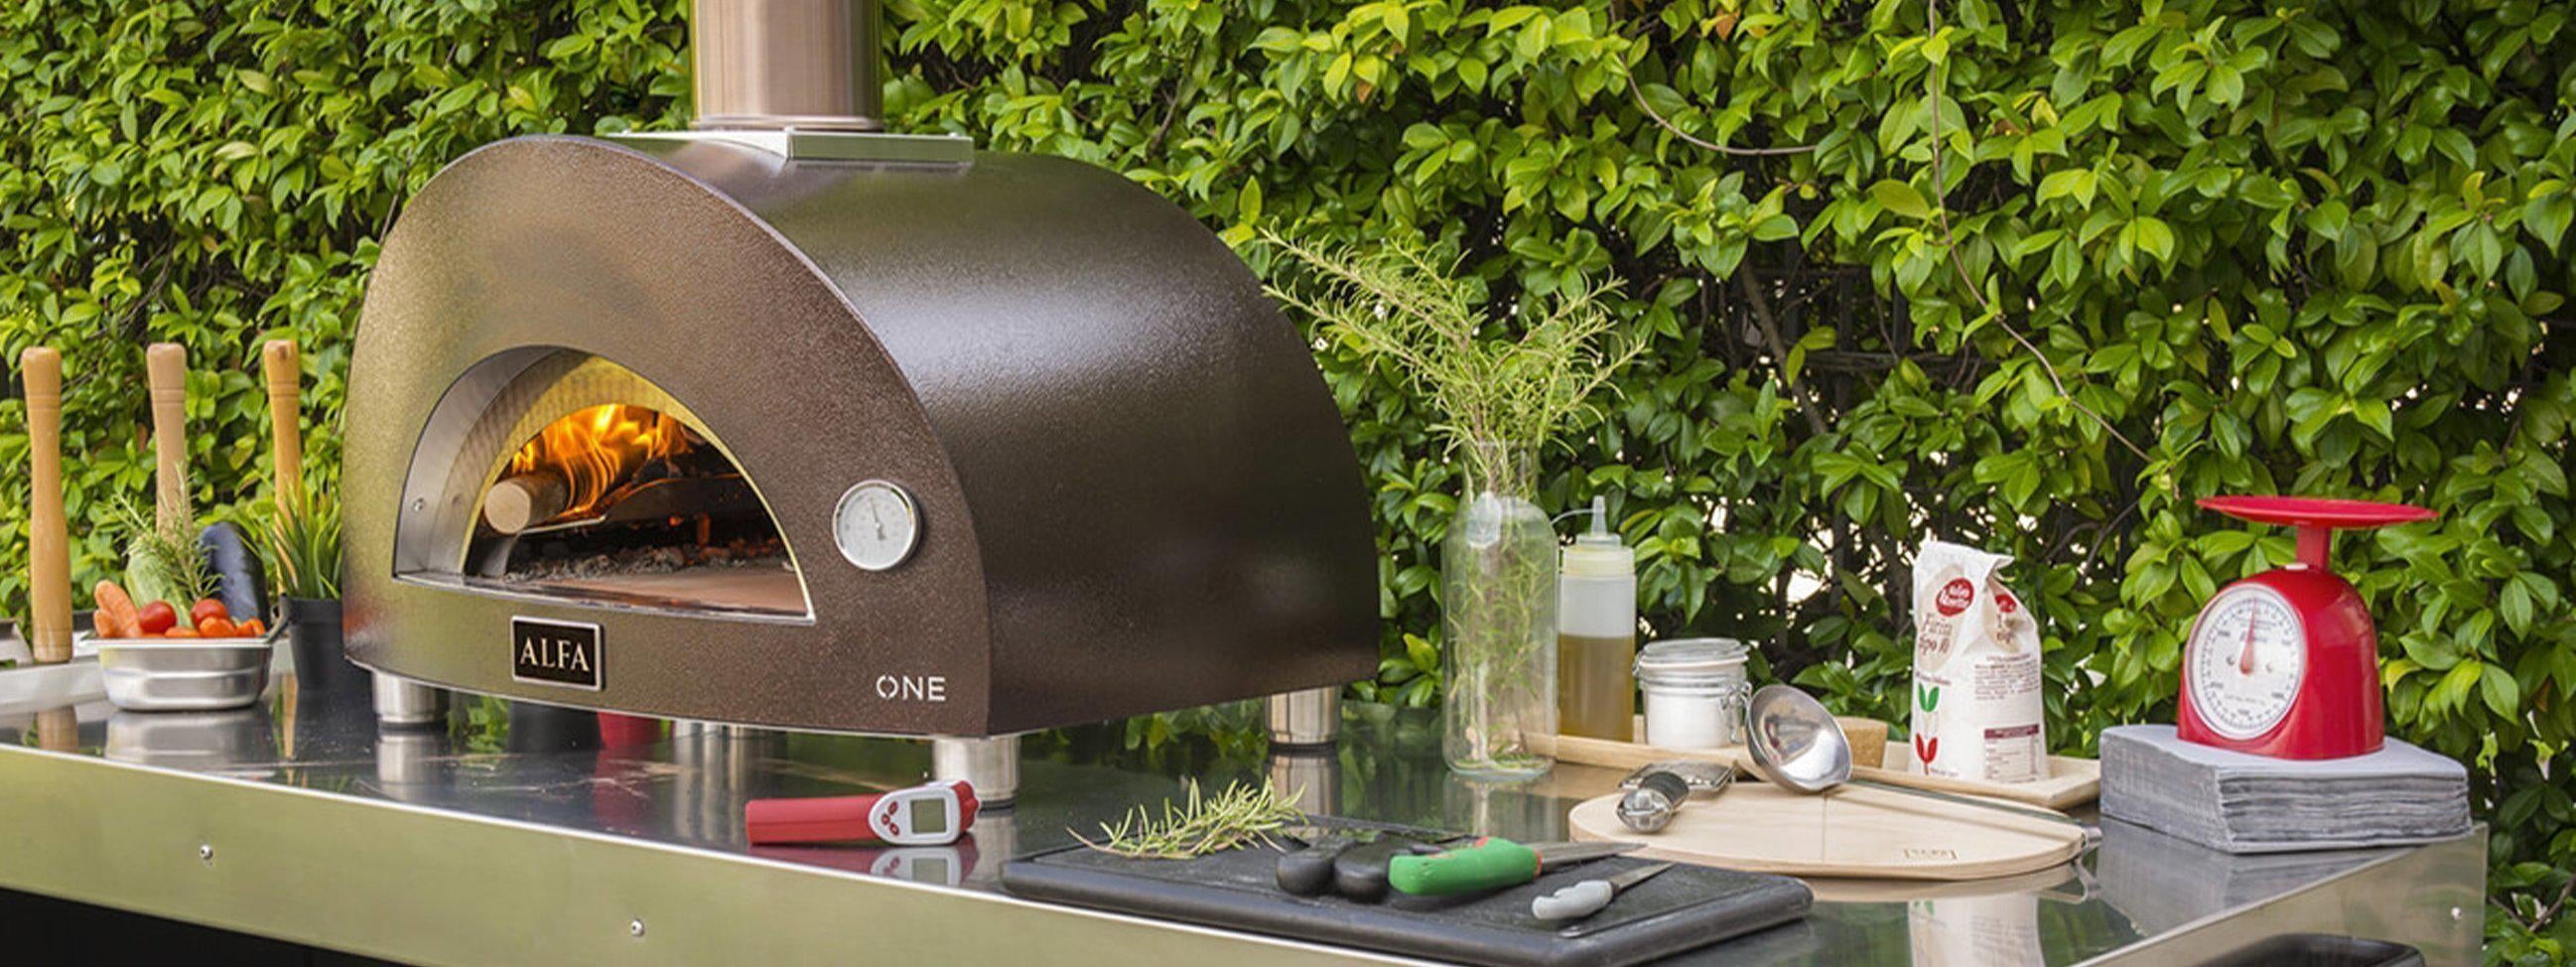 Table Top Pizza Oven | The Stove Yard